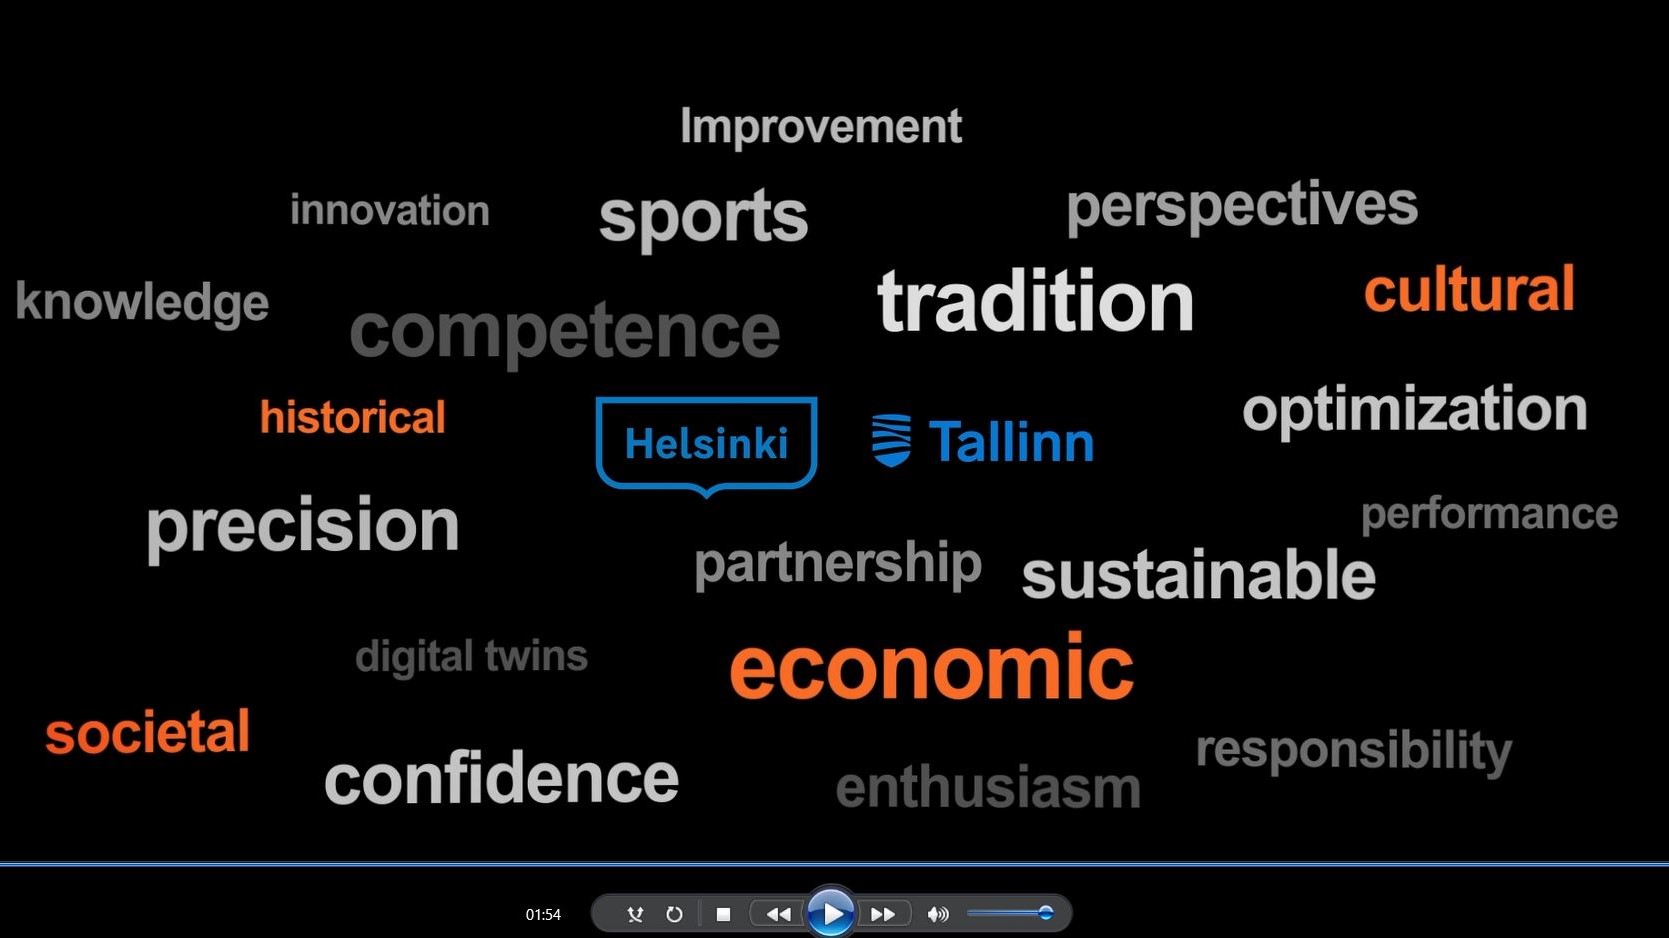 What is common for the twin cities Helsinki and Tallinn? 3D city model demonstration